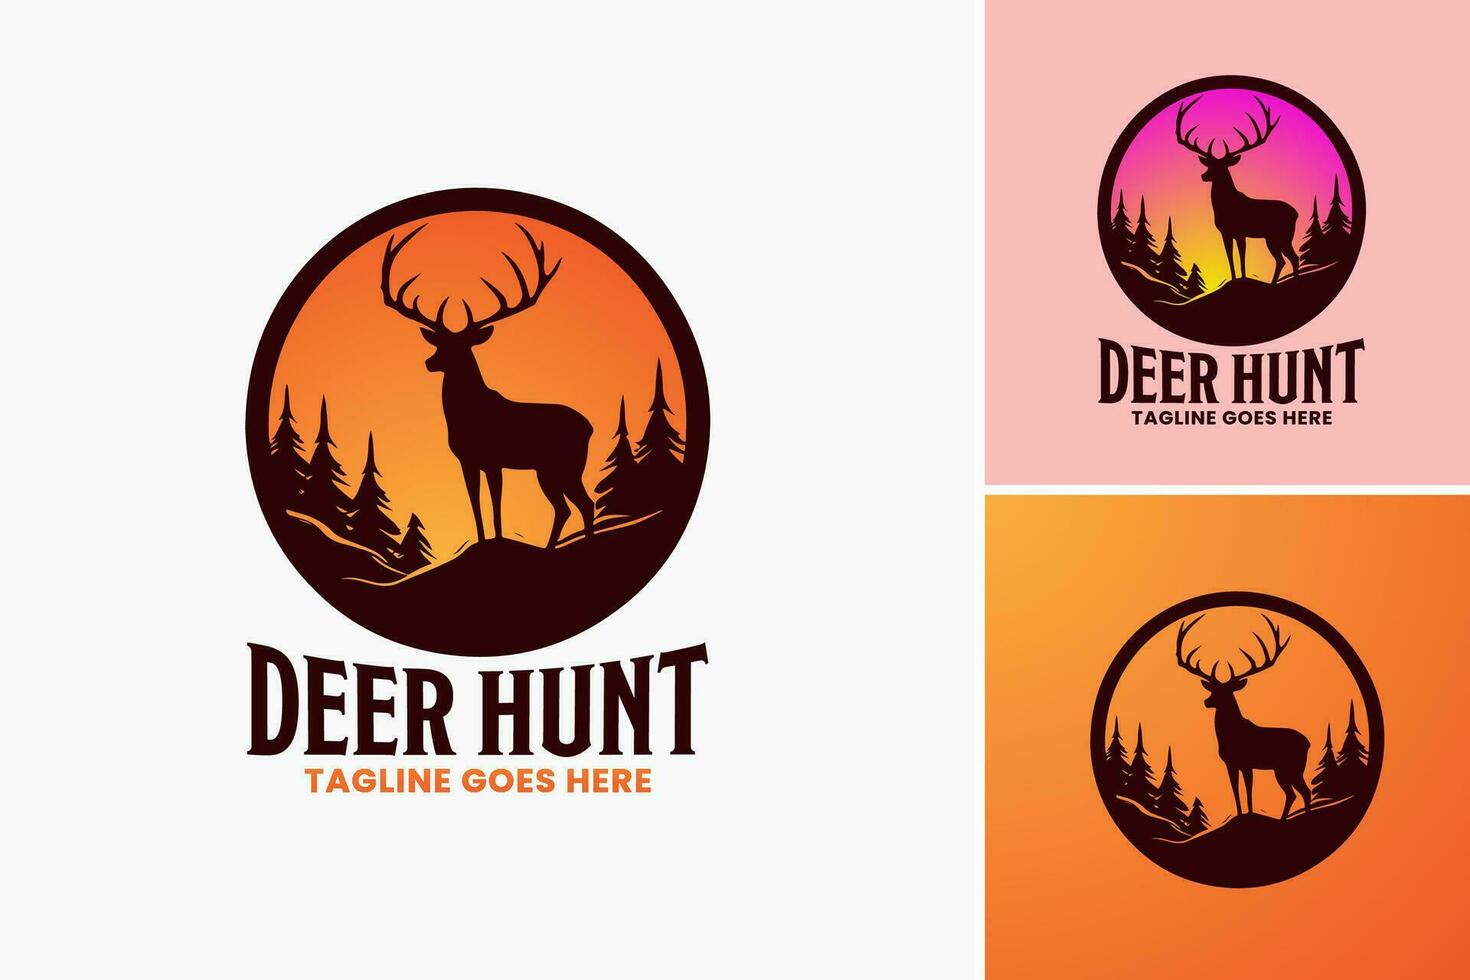 Deer Hunting Logo Template is a versatile design asset that provides a ready-to-use logo template for businesses or organizations involved in deer hunting or outdoor activities vector